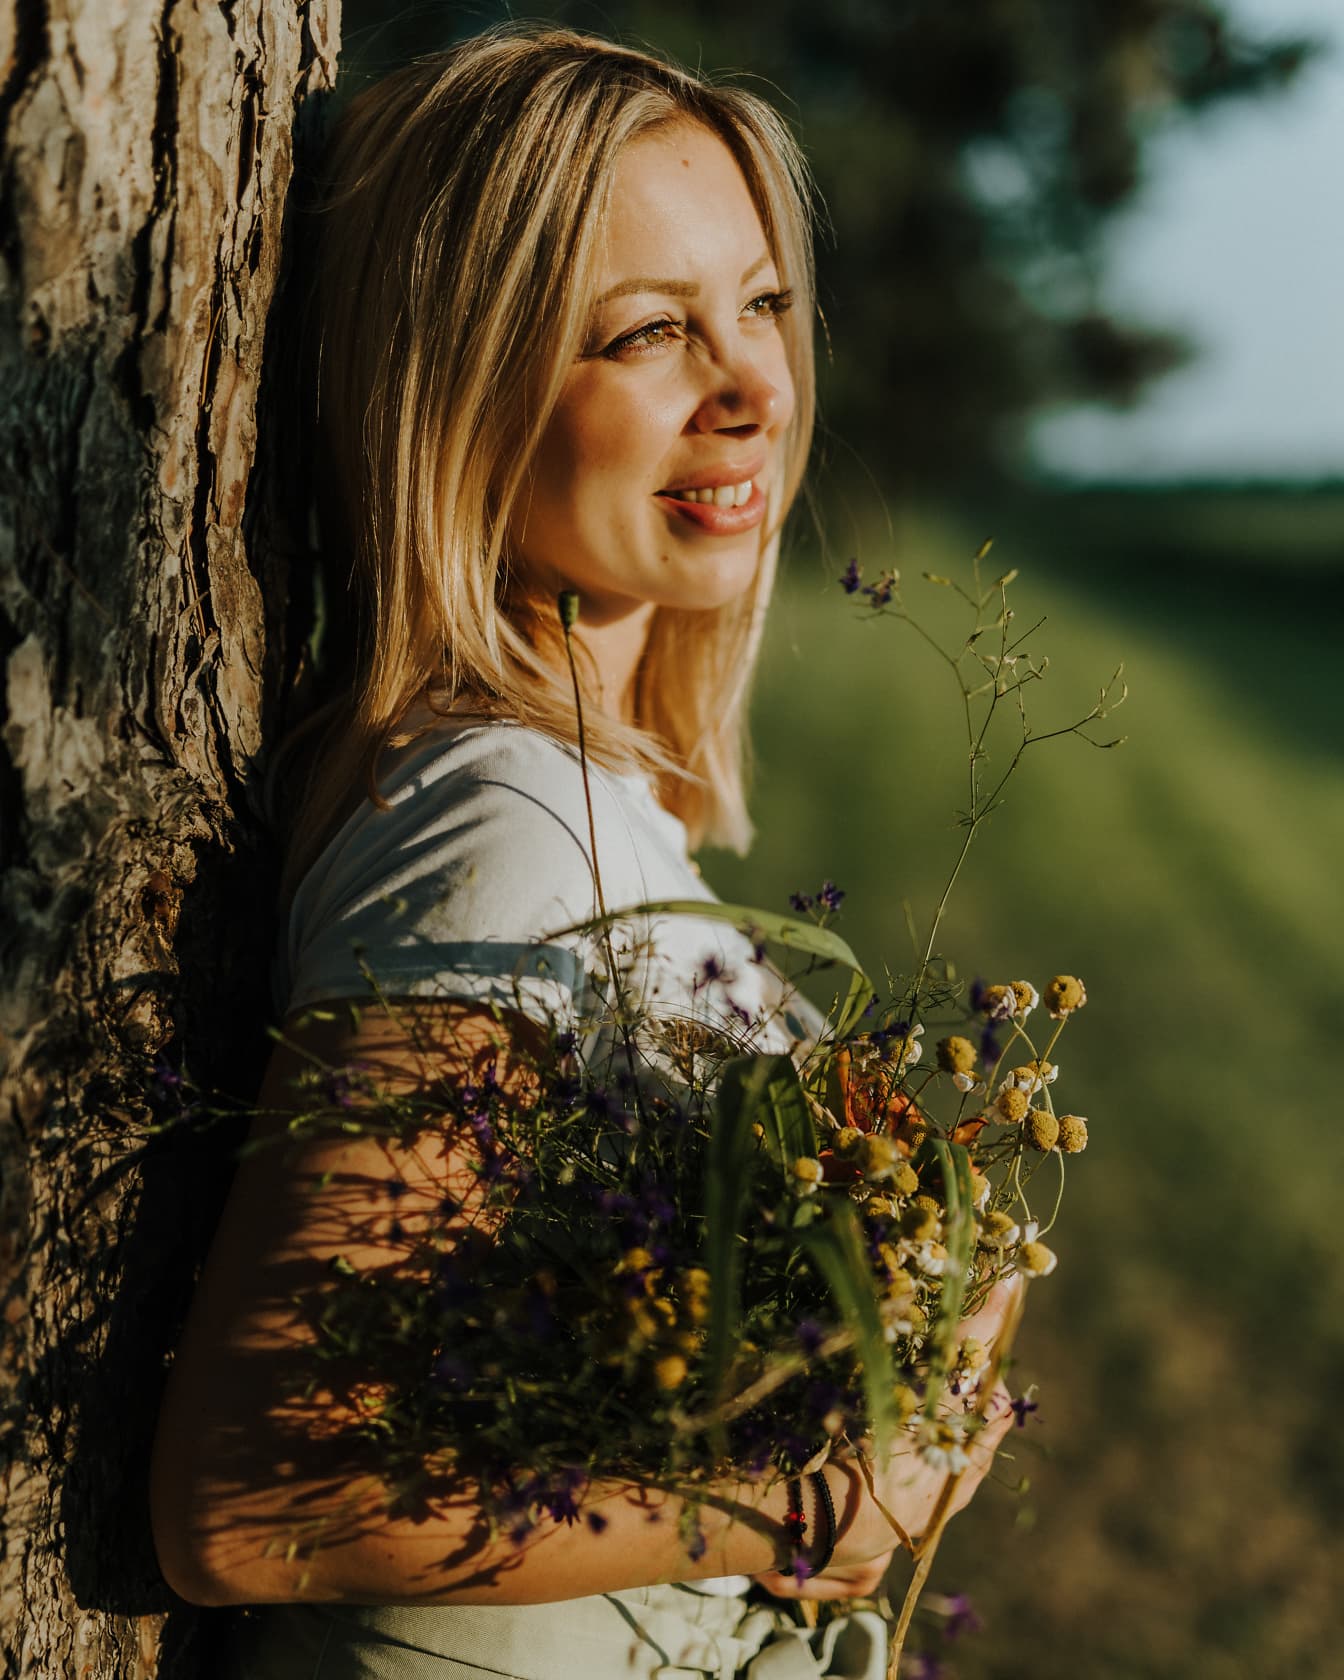 Side view portrait of smiling woman leaning against a tree while holding flowers